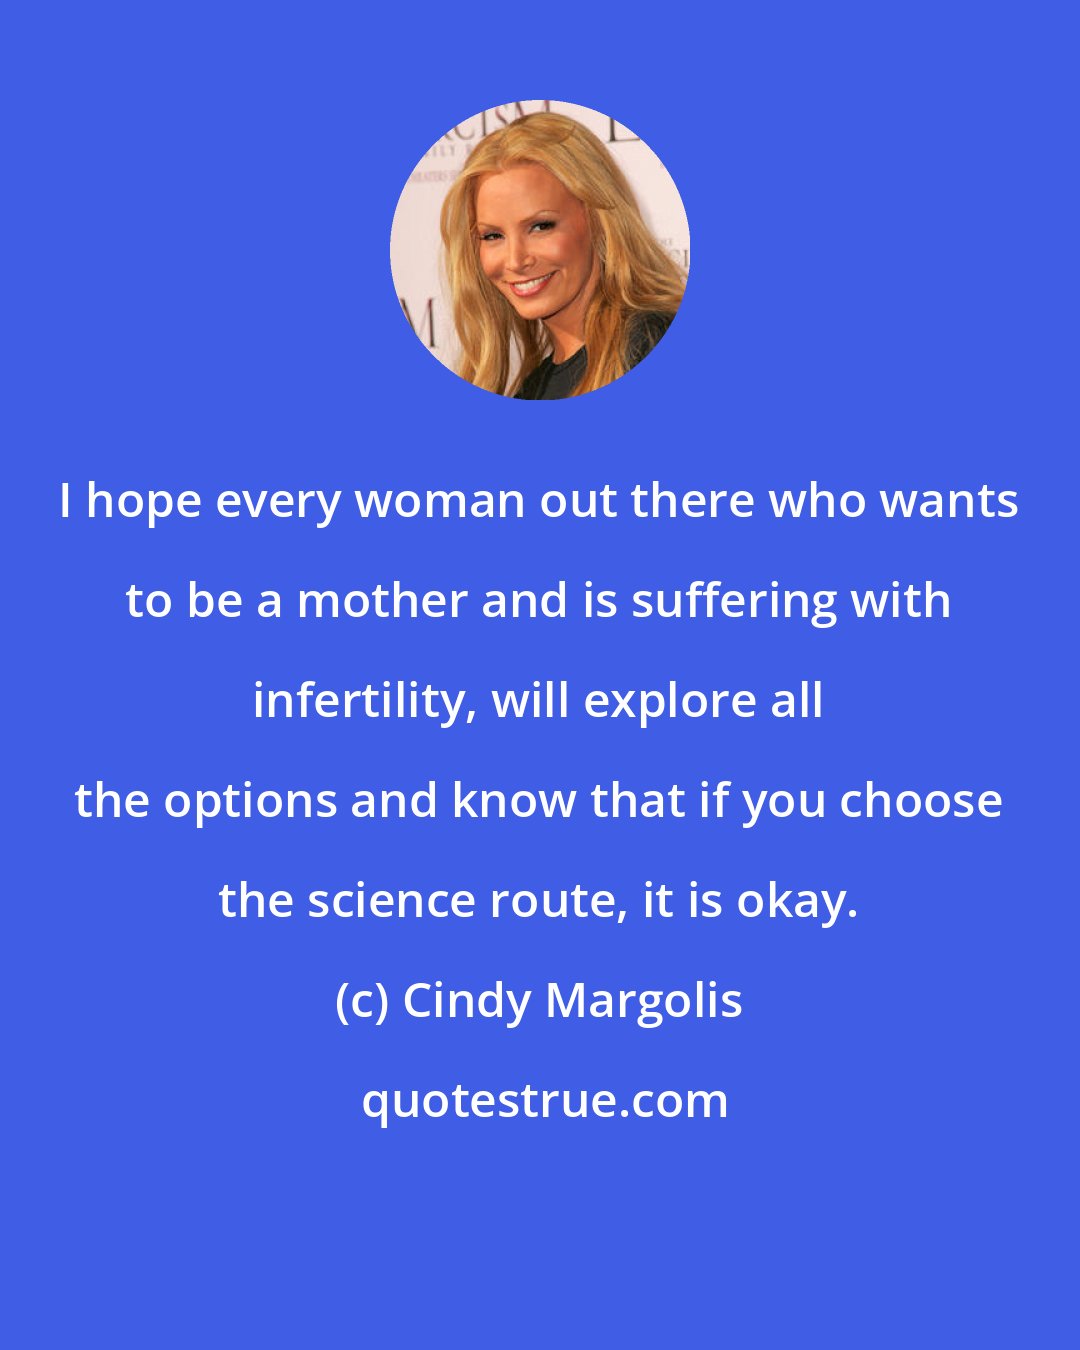 Cindy Margolis: I hope every woman out there who wants to be a mother and is suffering with infertility, will explore all the options and know that if you choose the science route, it is okay.